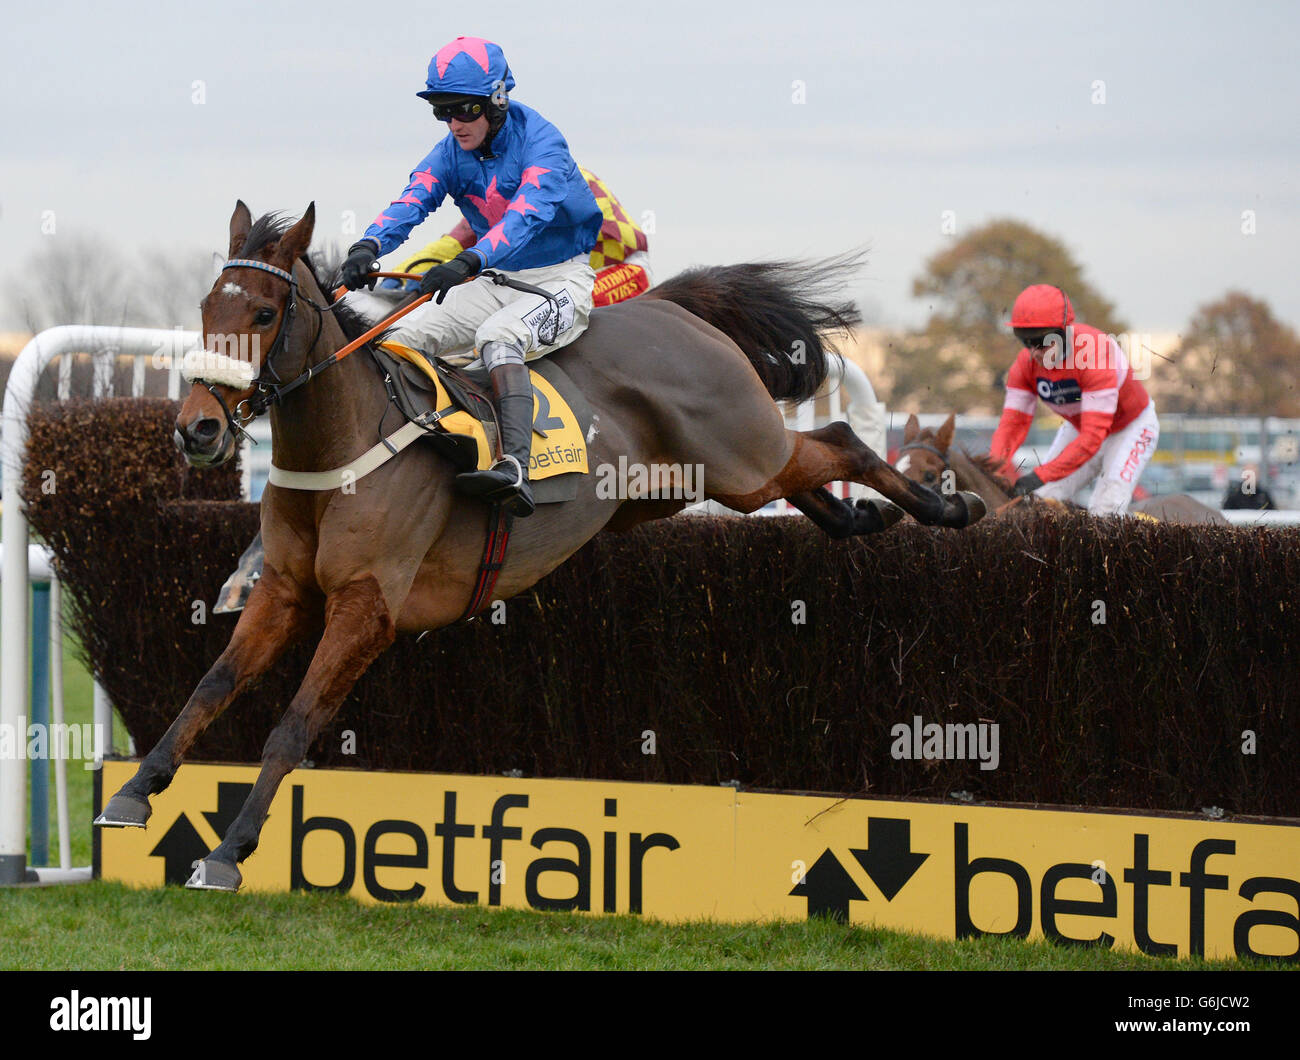 Cue Card and Joe Tizzard on their way to victory in the Betfair Chase during the Betfair Chase Festival at Haydock Park Racecourse, Newton-le-Willows. Stock Photo